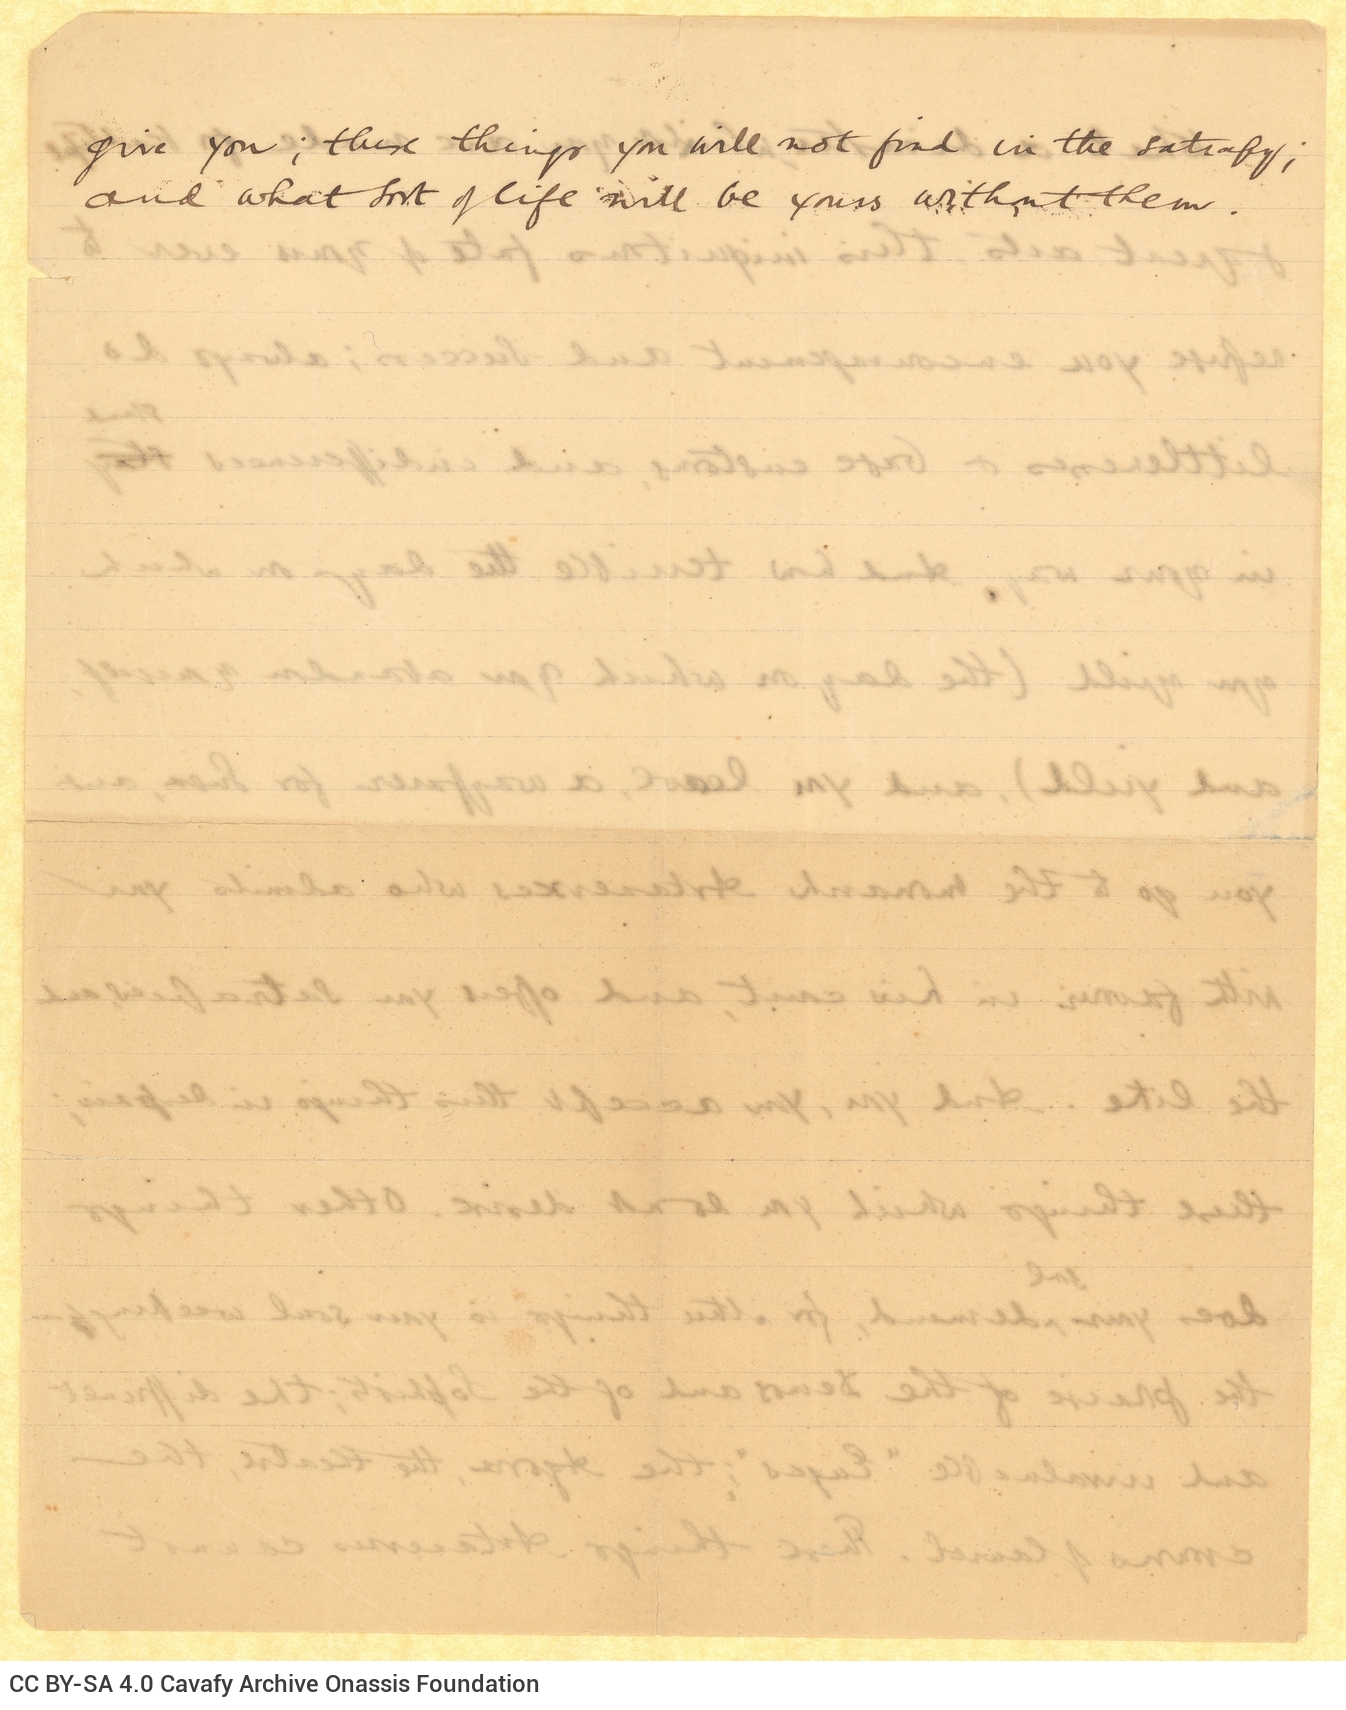 Handwritten prose translation of the poem "The Satrapy" in English. The text is handwritten by Cavafy on both sides of a r